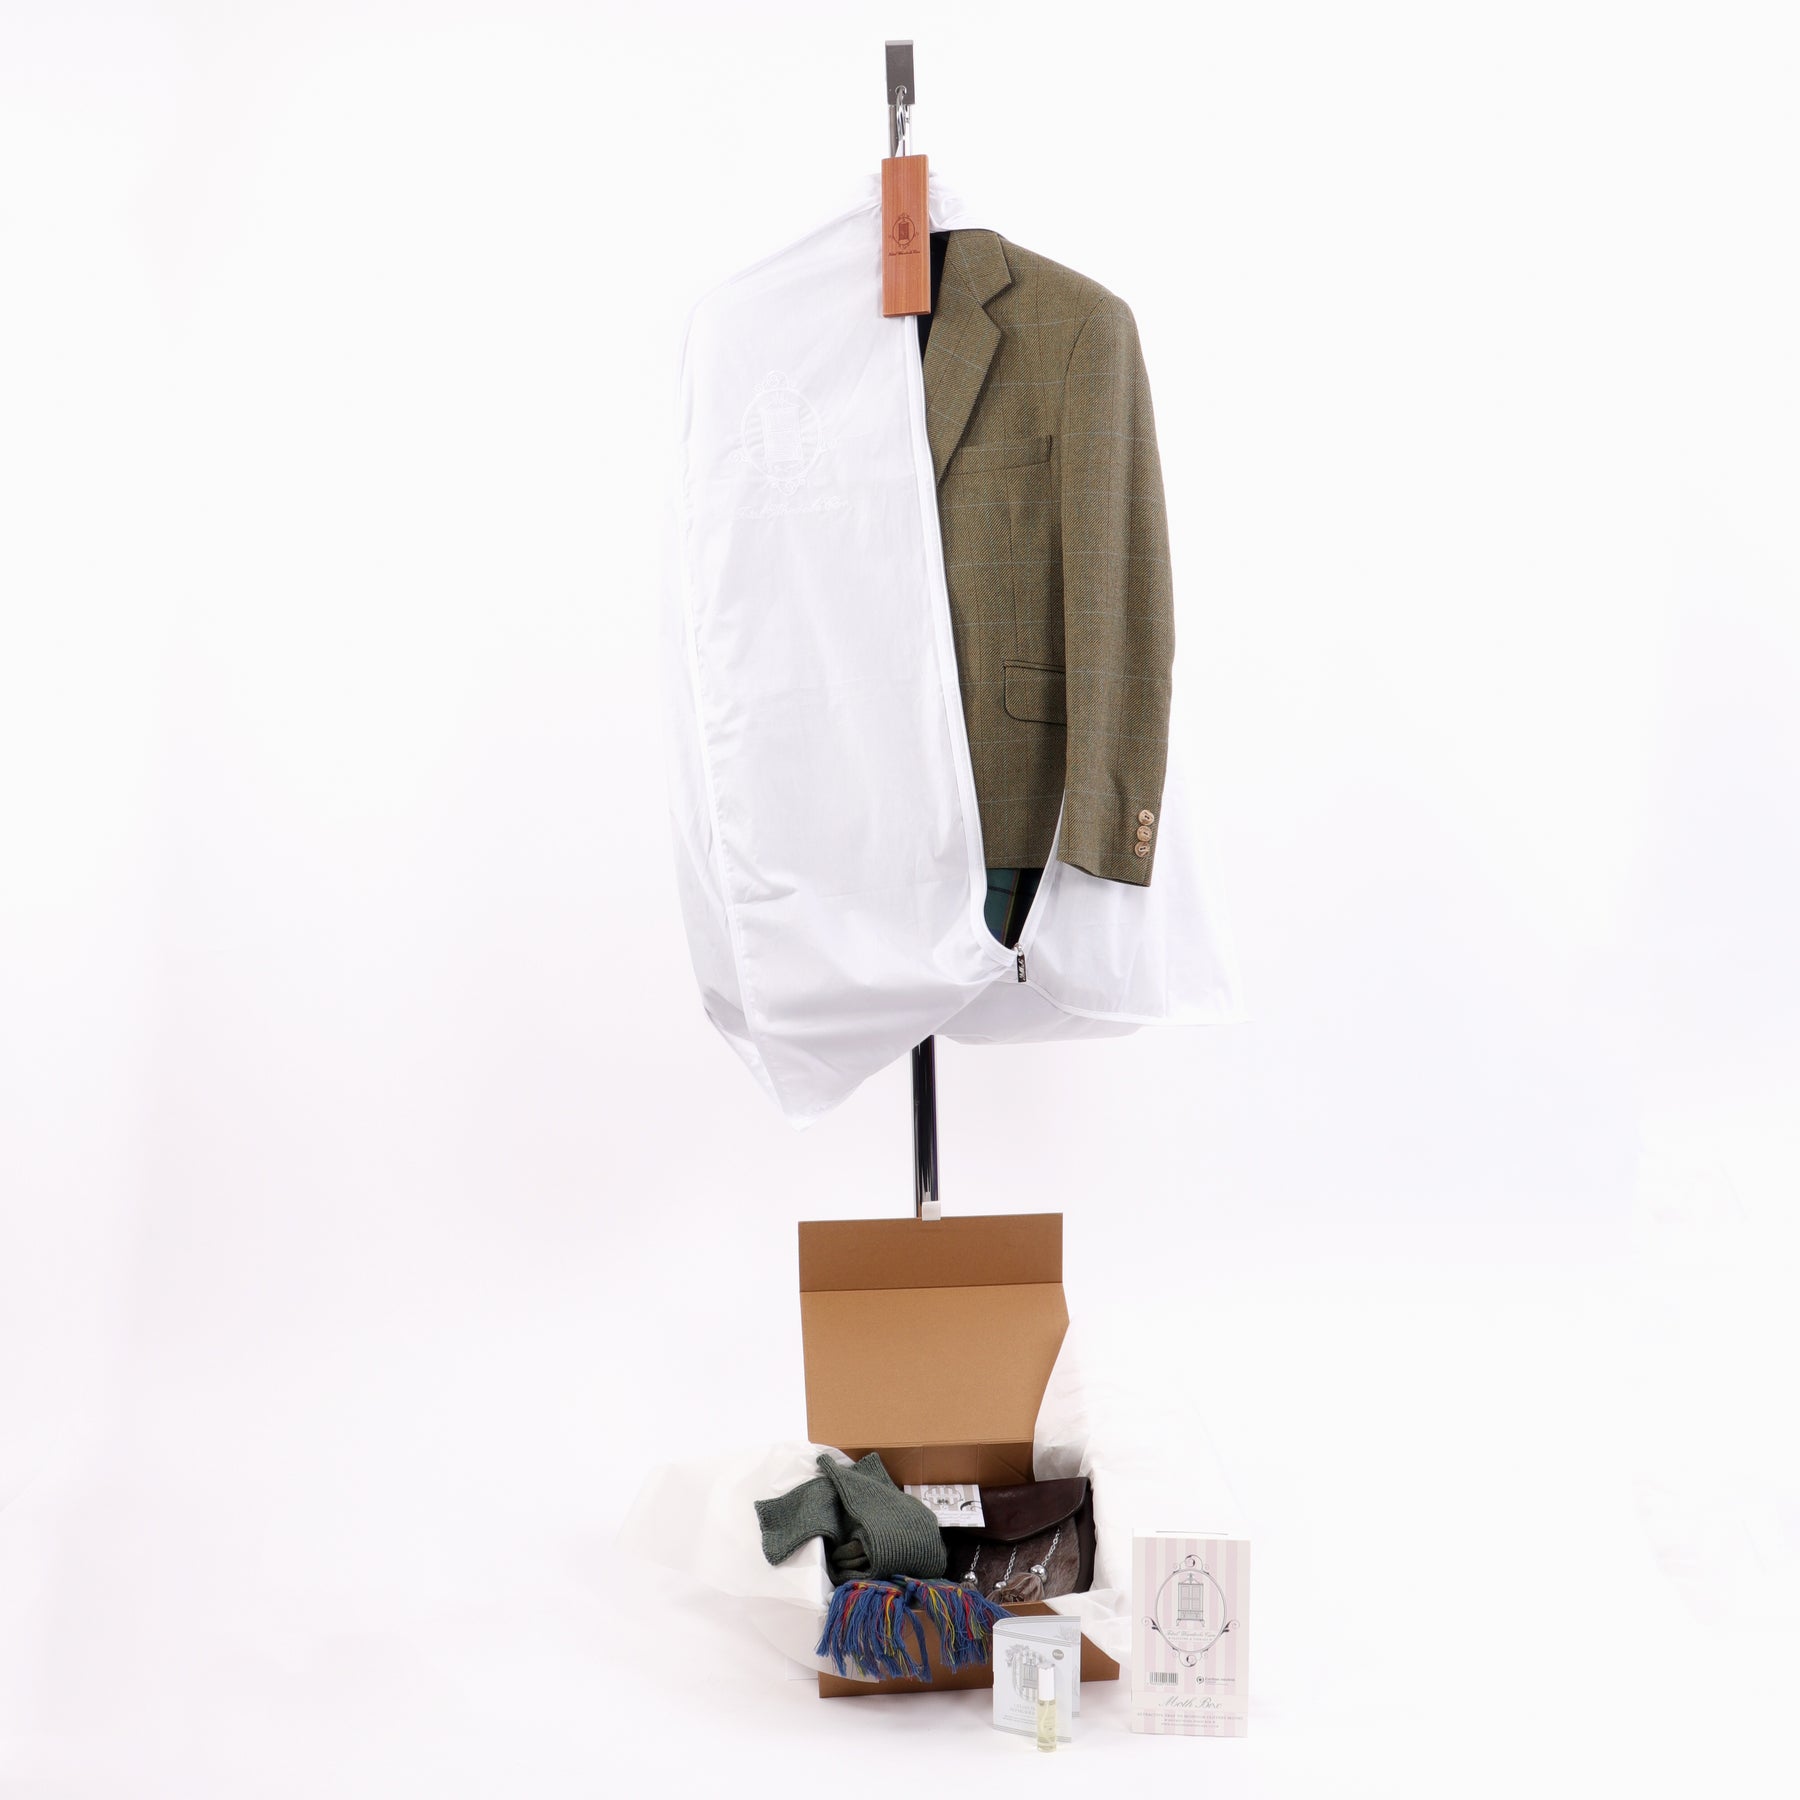 Open clothing care bag with tweed jacket showing from side view and kilt care kit to bottom